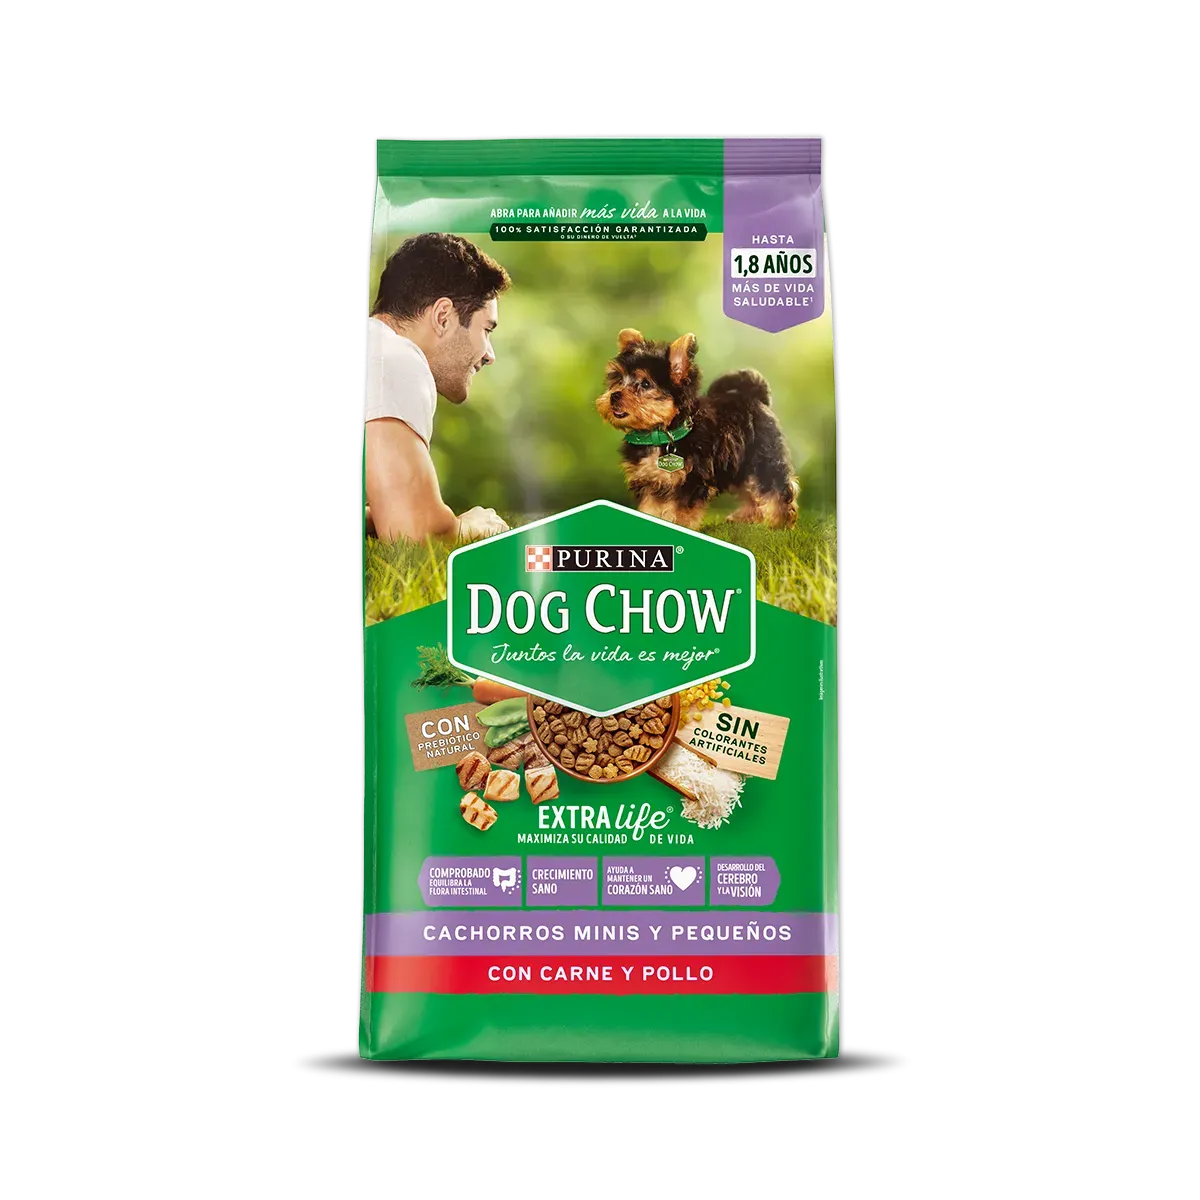 Purina-DogChow-chachorro-minis-colombia.webp